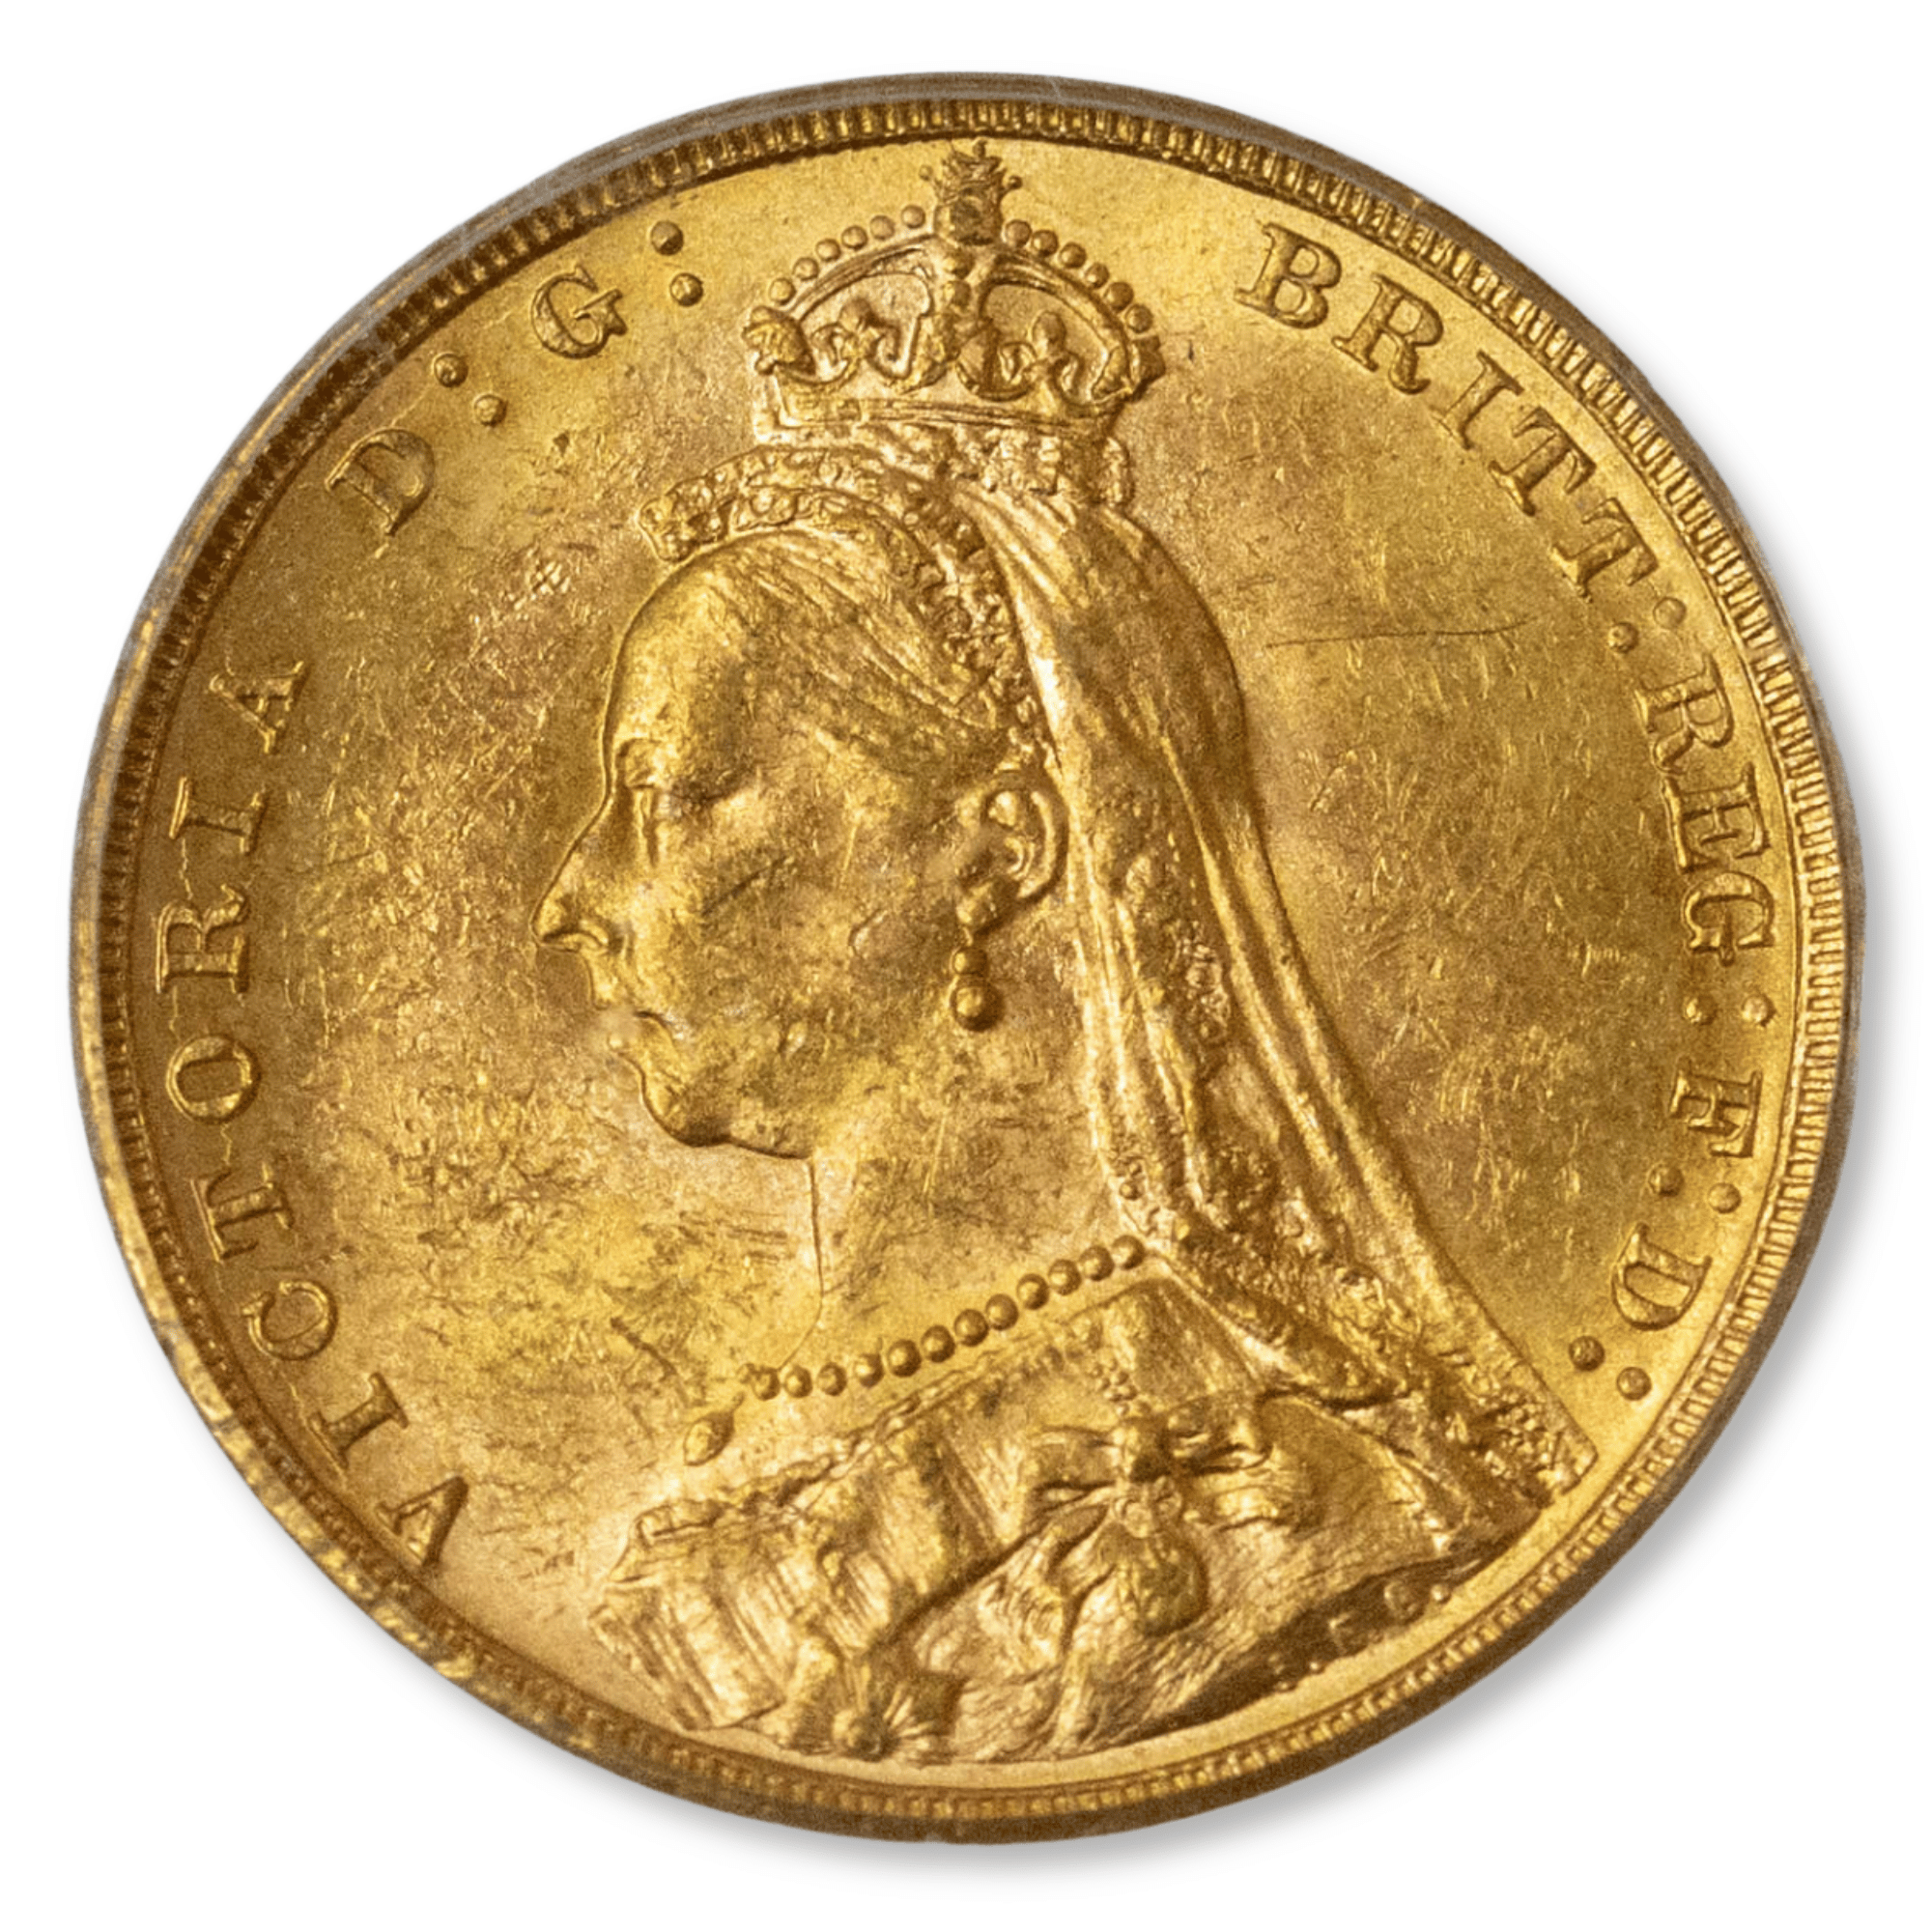 1891M Jubilee Head Sovereign PCGS MS62